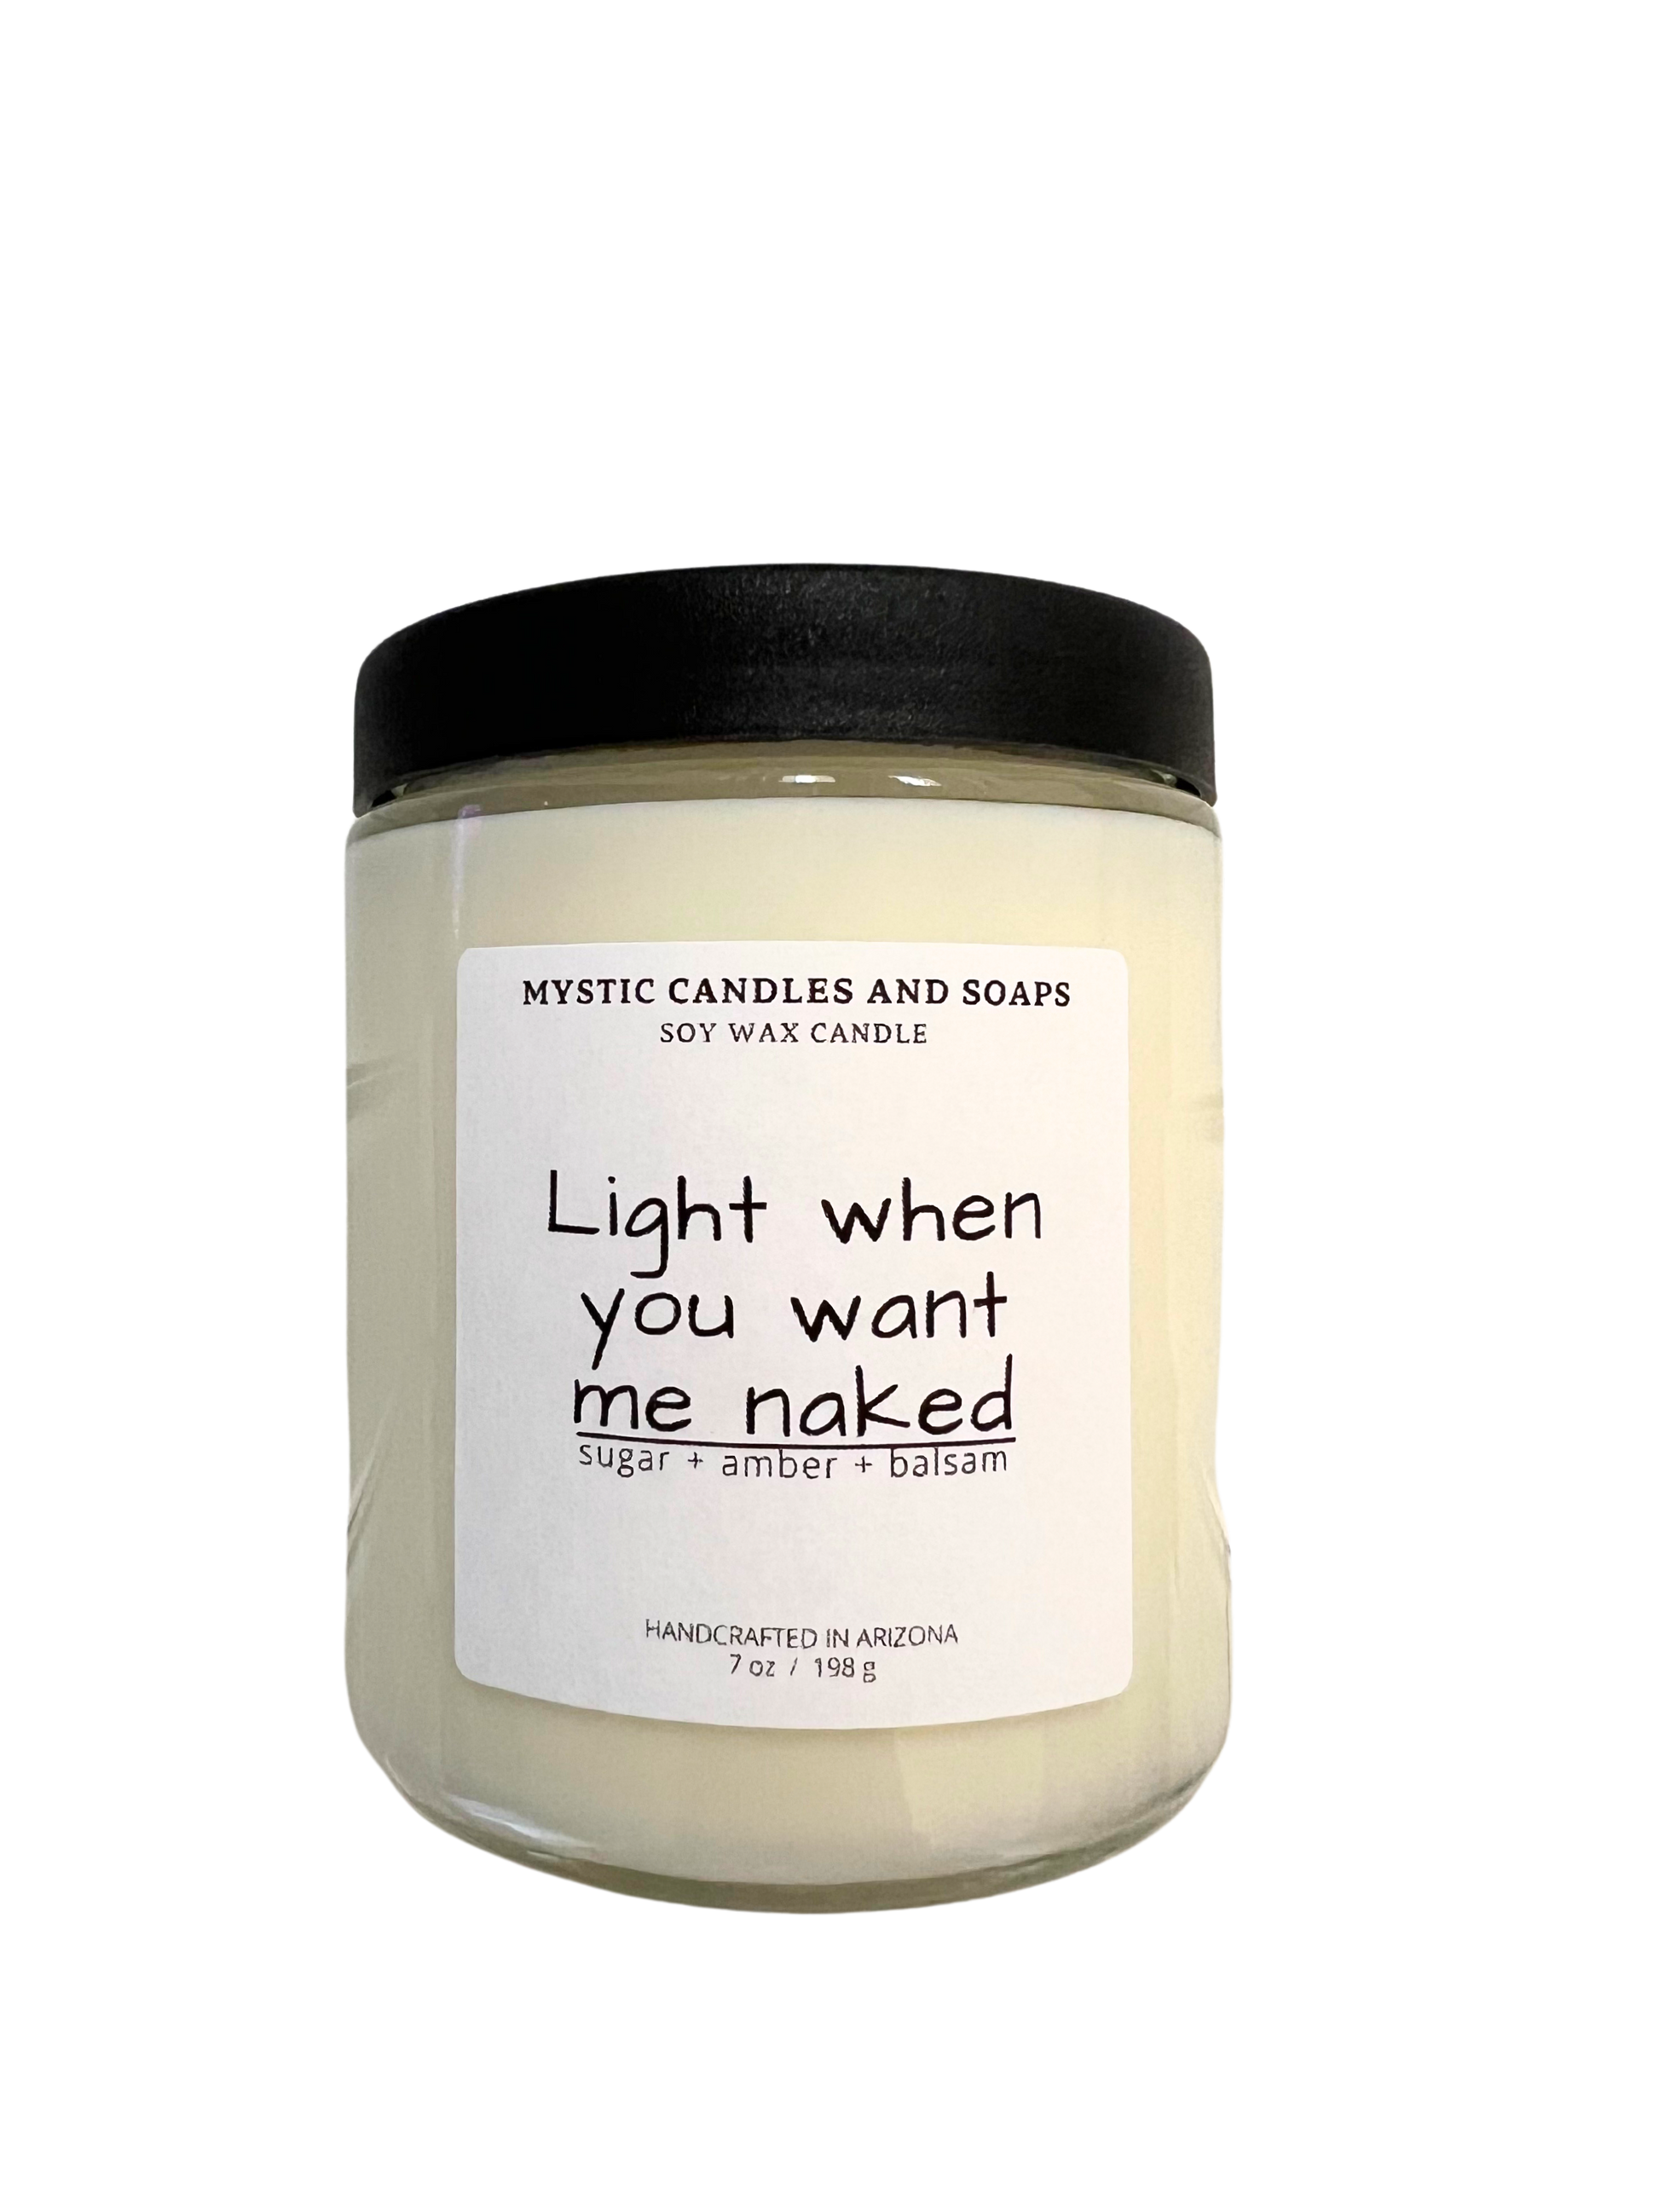 Funny label Light When You Want MNe Naked Candle